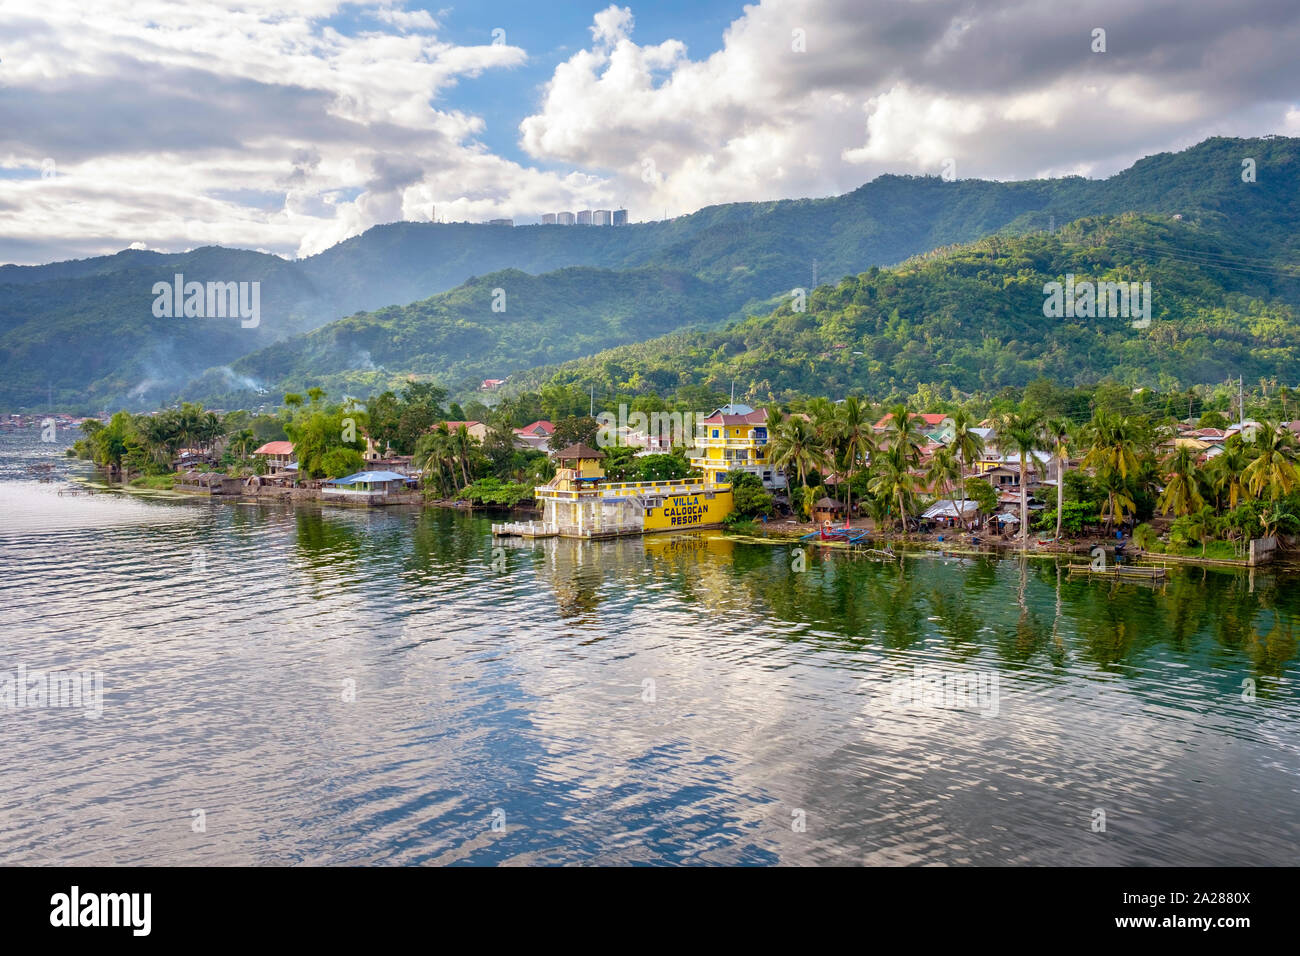 Barangay Caloocan in the village of Talisay on the shore of Taal Lake, Cavite Province, Philippines Stock Photo